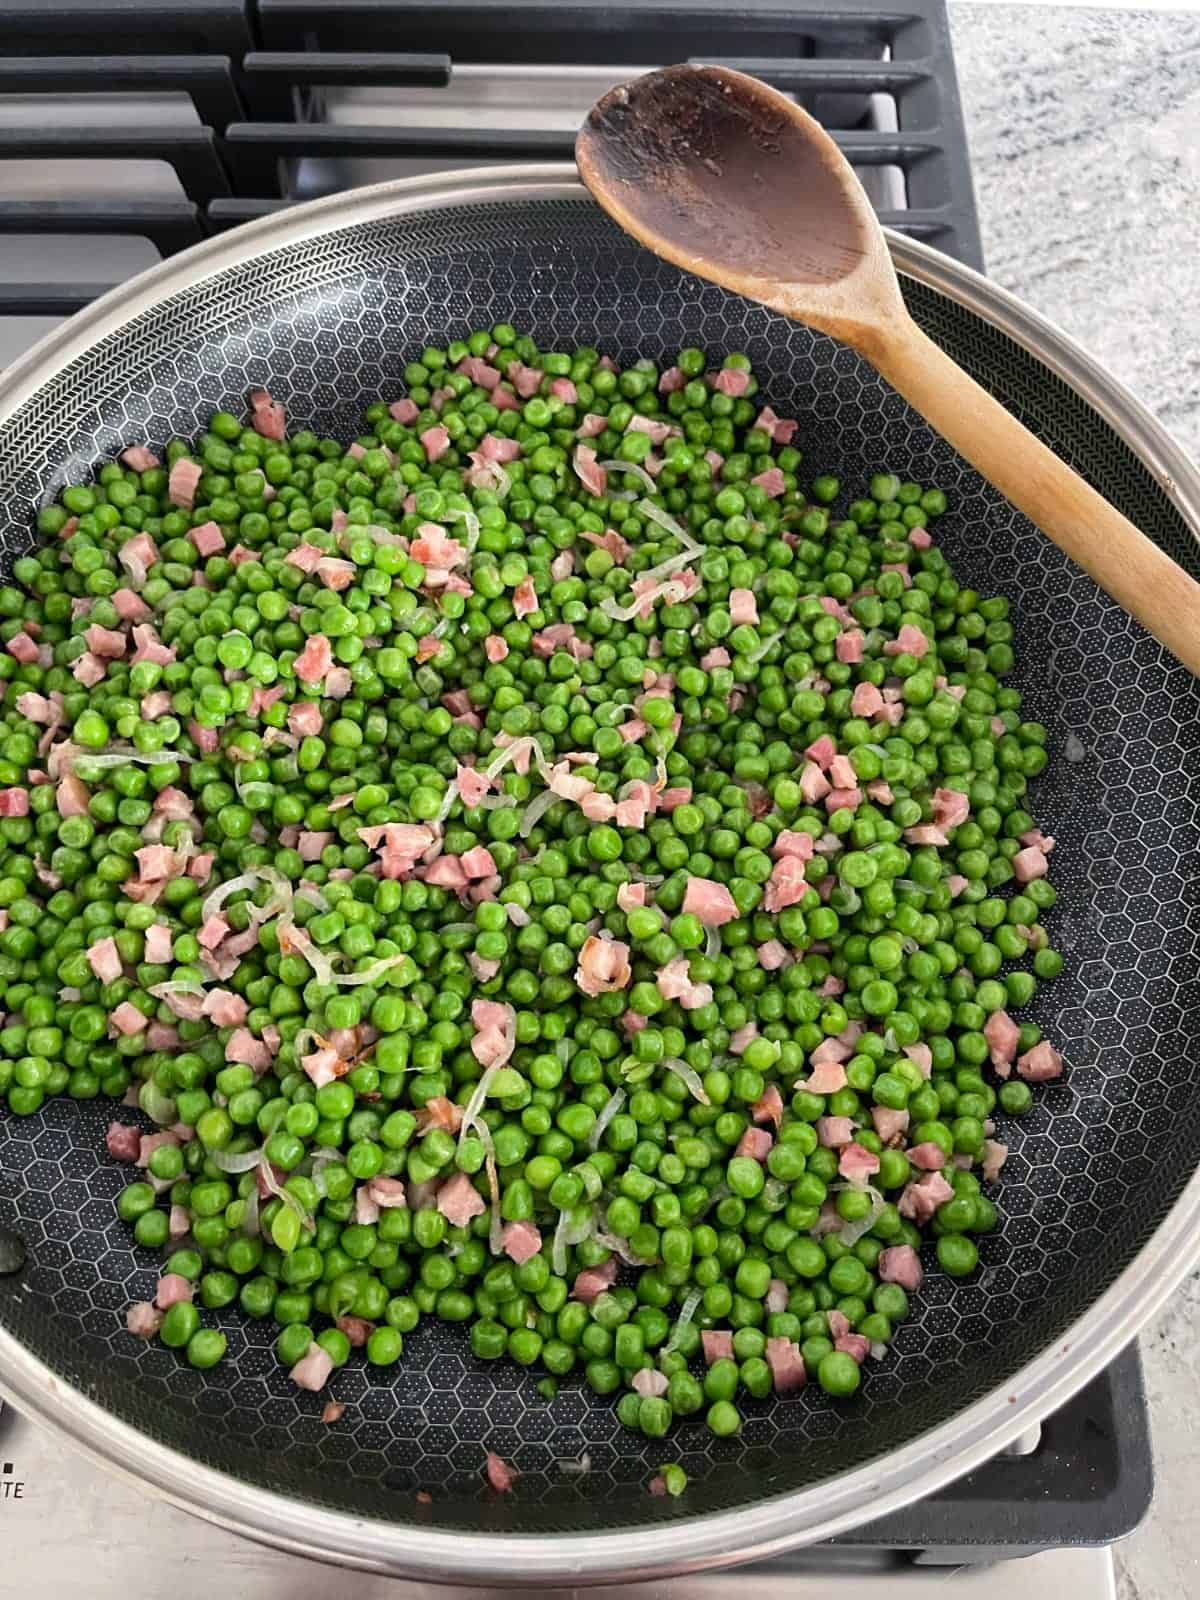 Cooking peas, pancetta and shallots in skillet with wooden spoon.